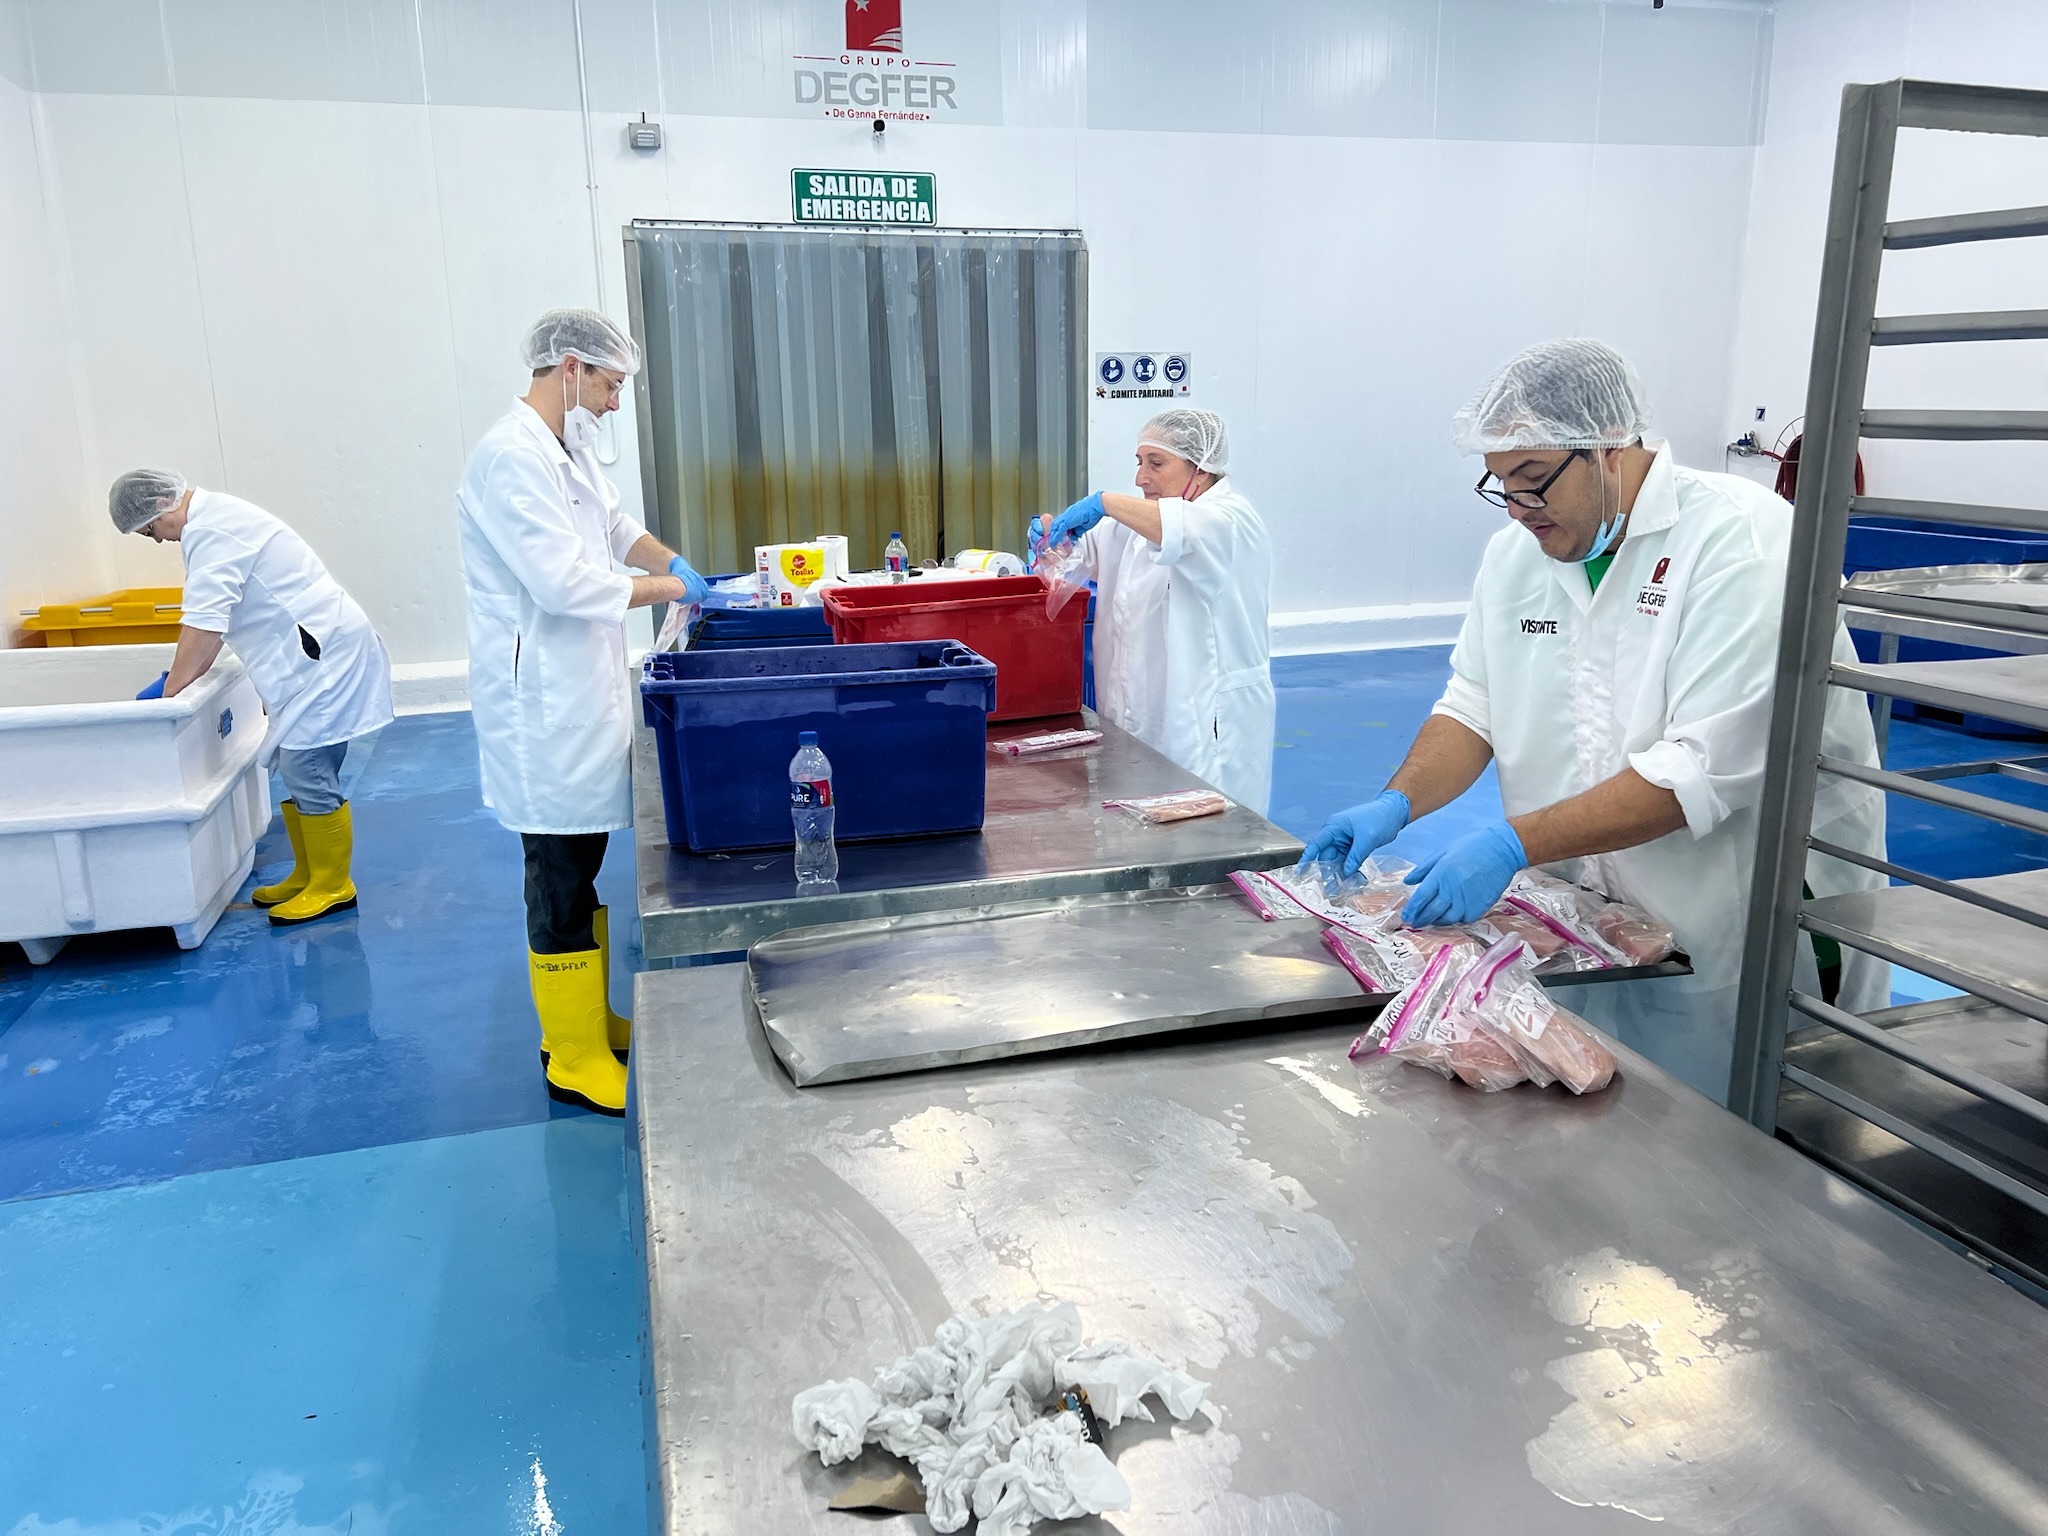 Personnel in lab coats and hair nets prepare bags of shrimp in a storage facility.